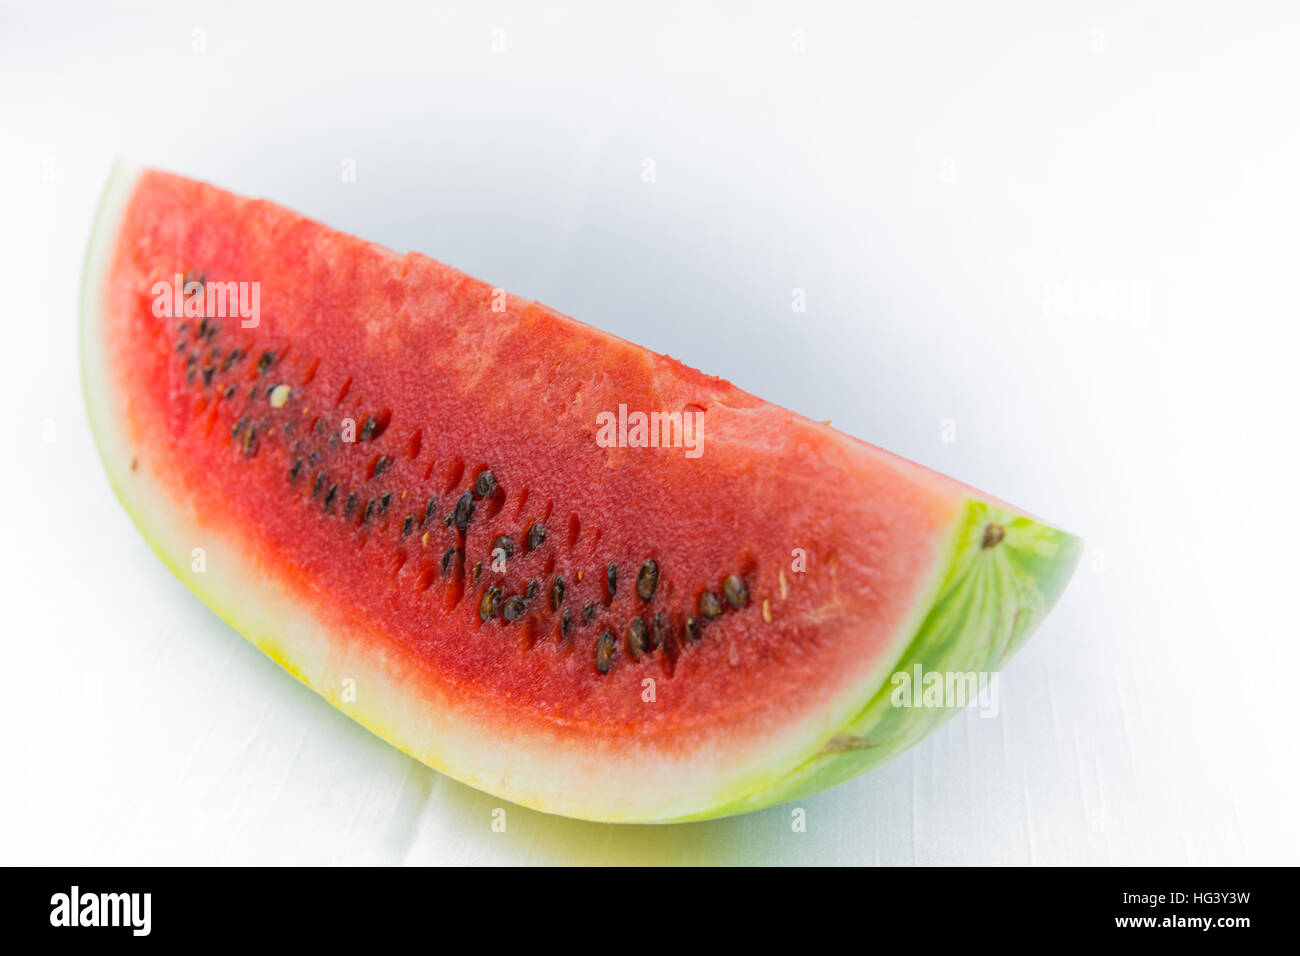 Watermelon cut in half or in segments.Typical half-moon. Sicilian or Mediterranean summer fruit. On white background Cut. graphic resource. Stock Photo